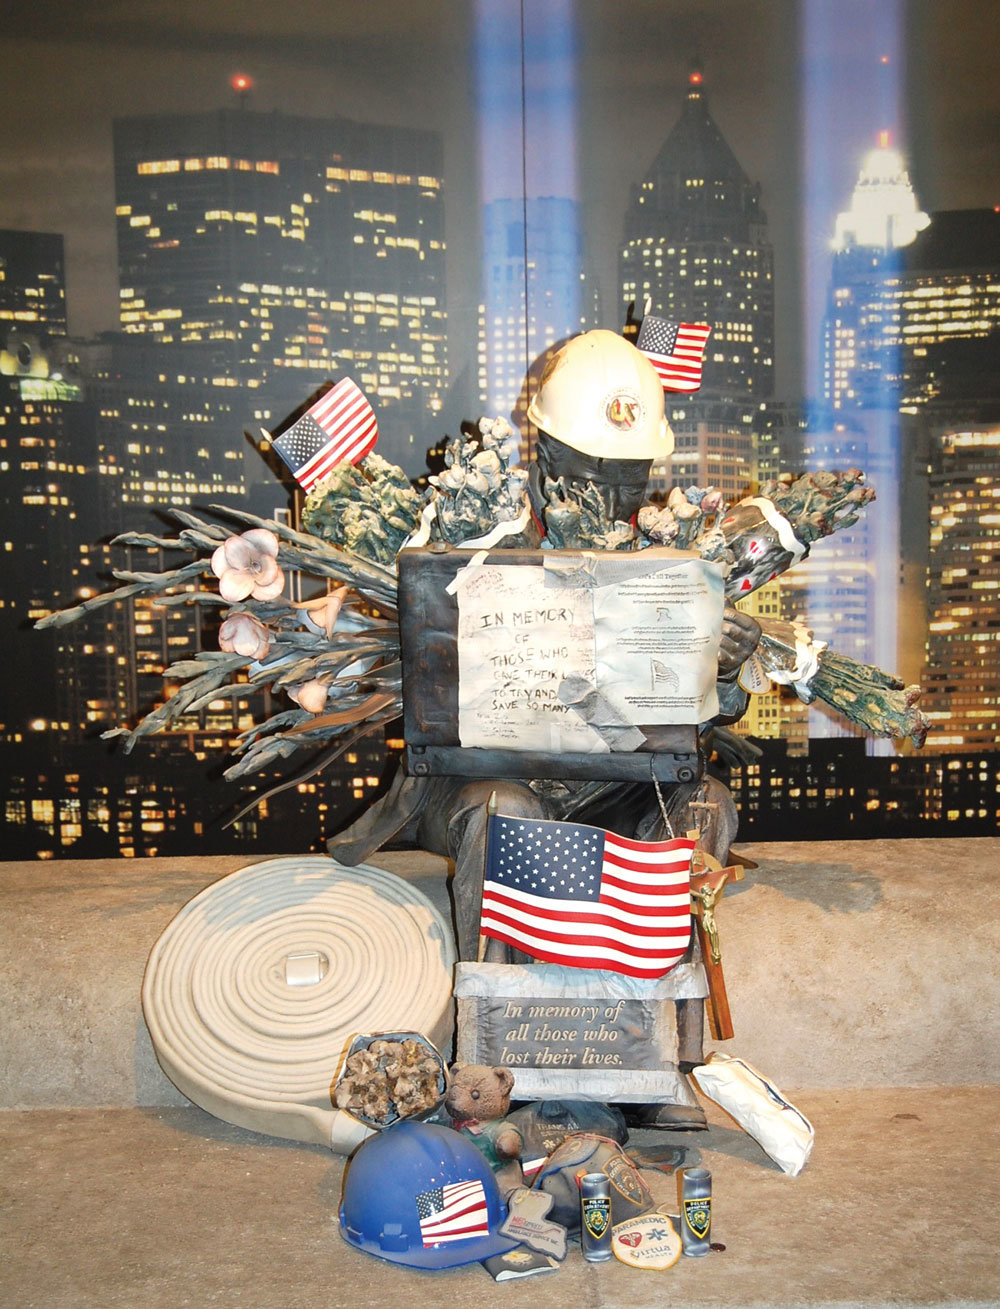 The message on this 9/11 tribute reads “In memory of all those who lost their lives.” (Doreen Stratton)